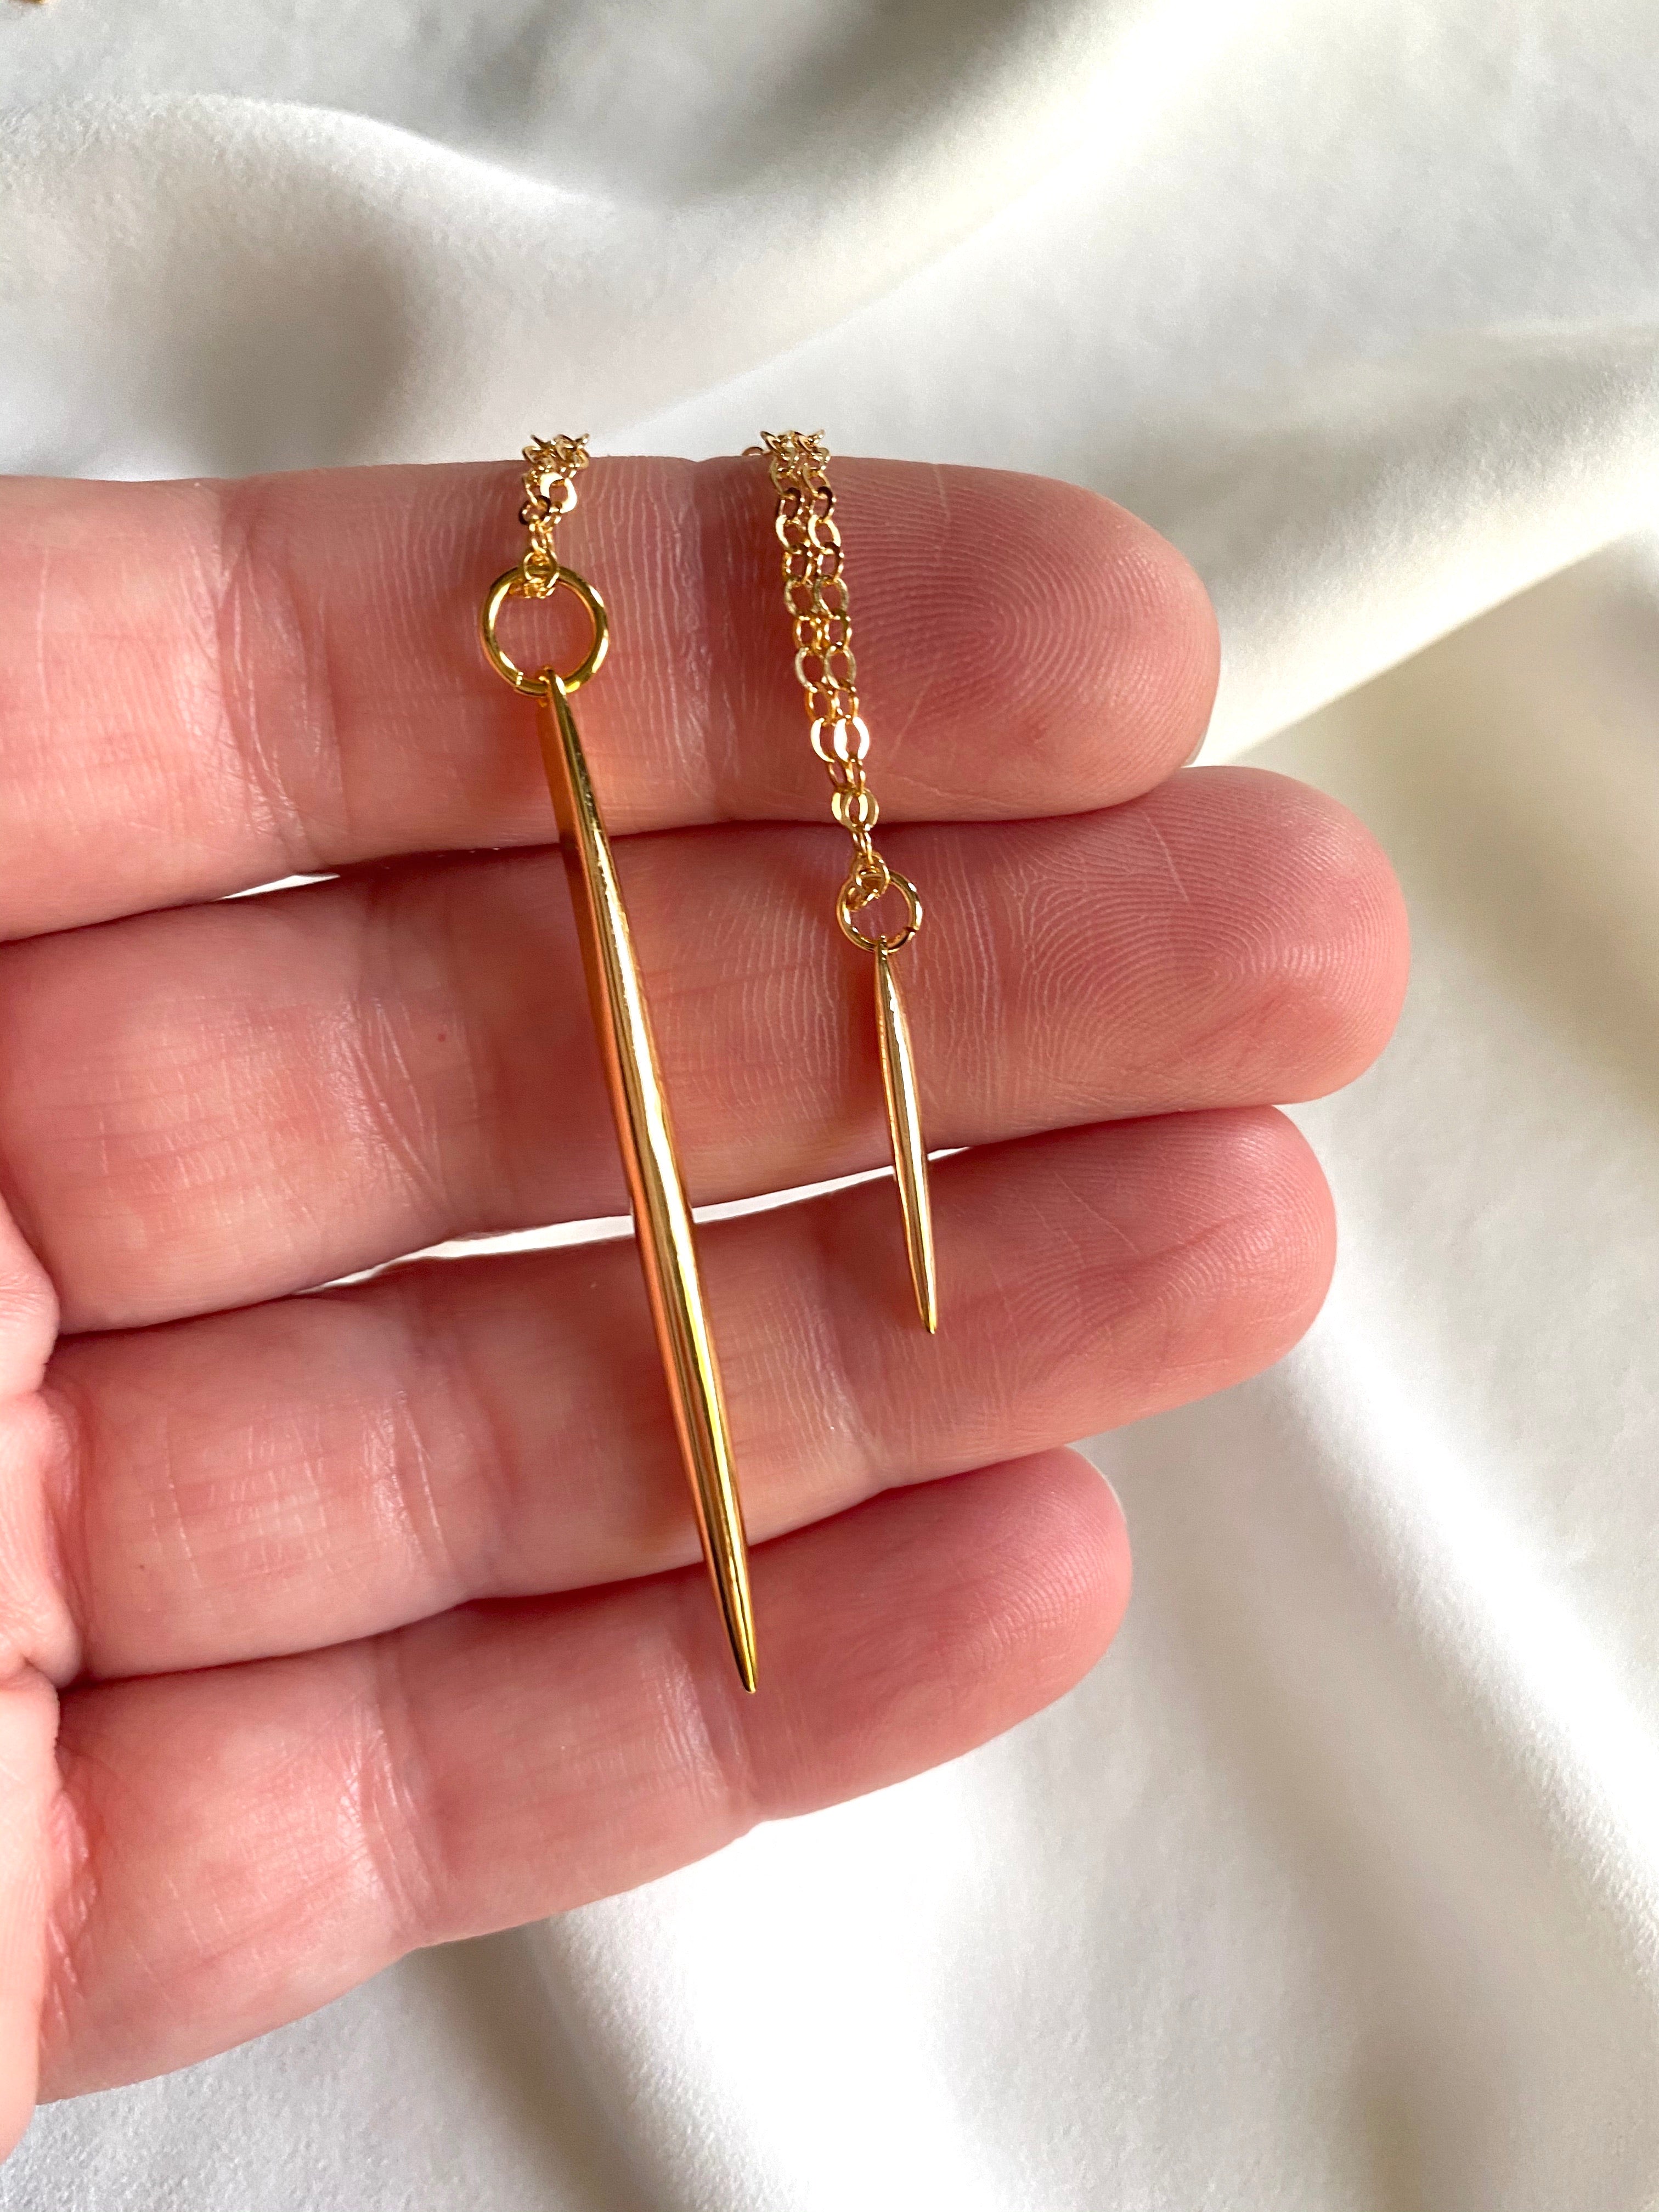 Dainty Gold Filled Spike Charm Necklace - Needle Necklace